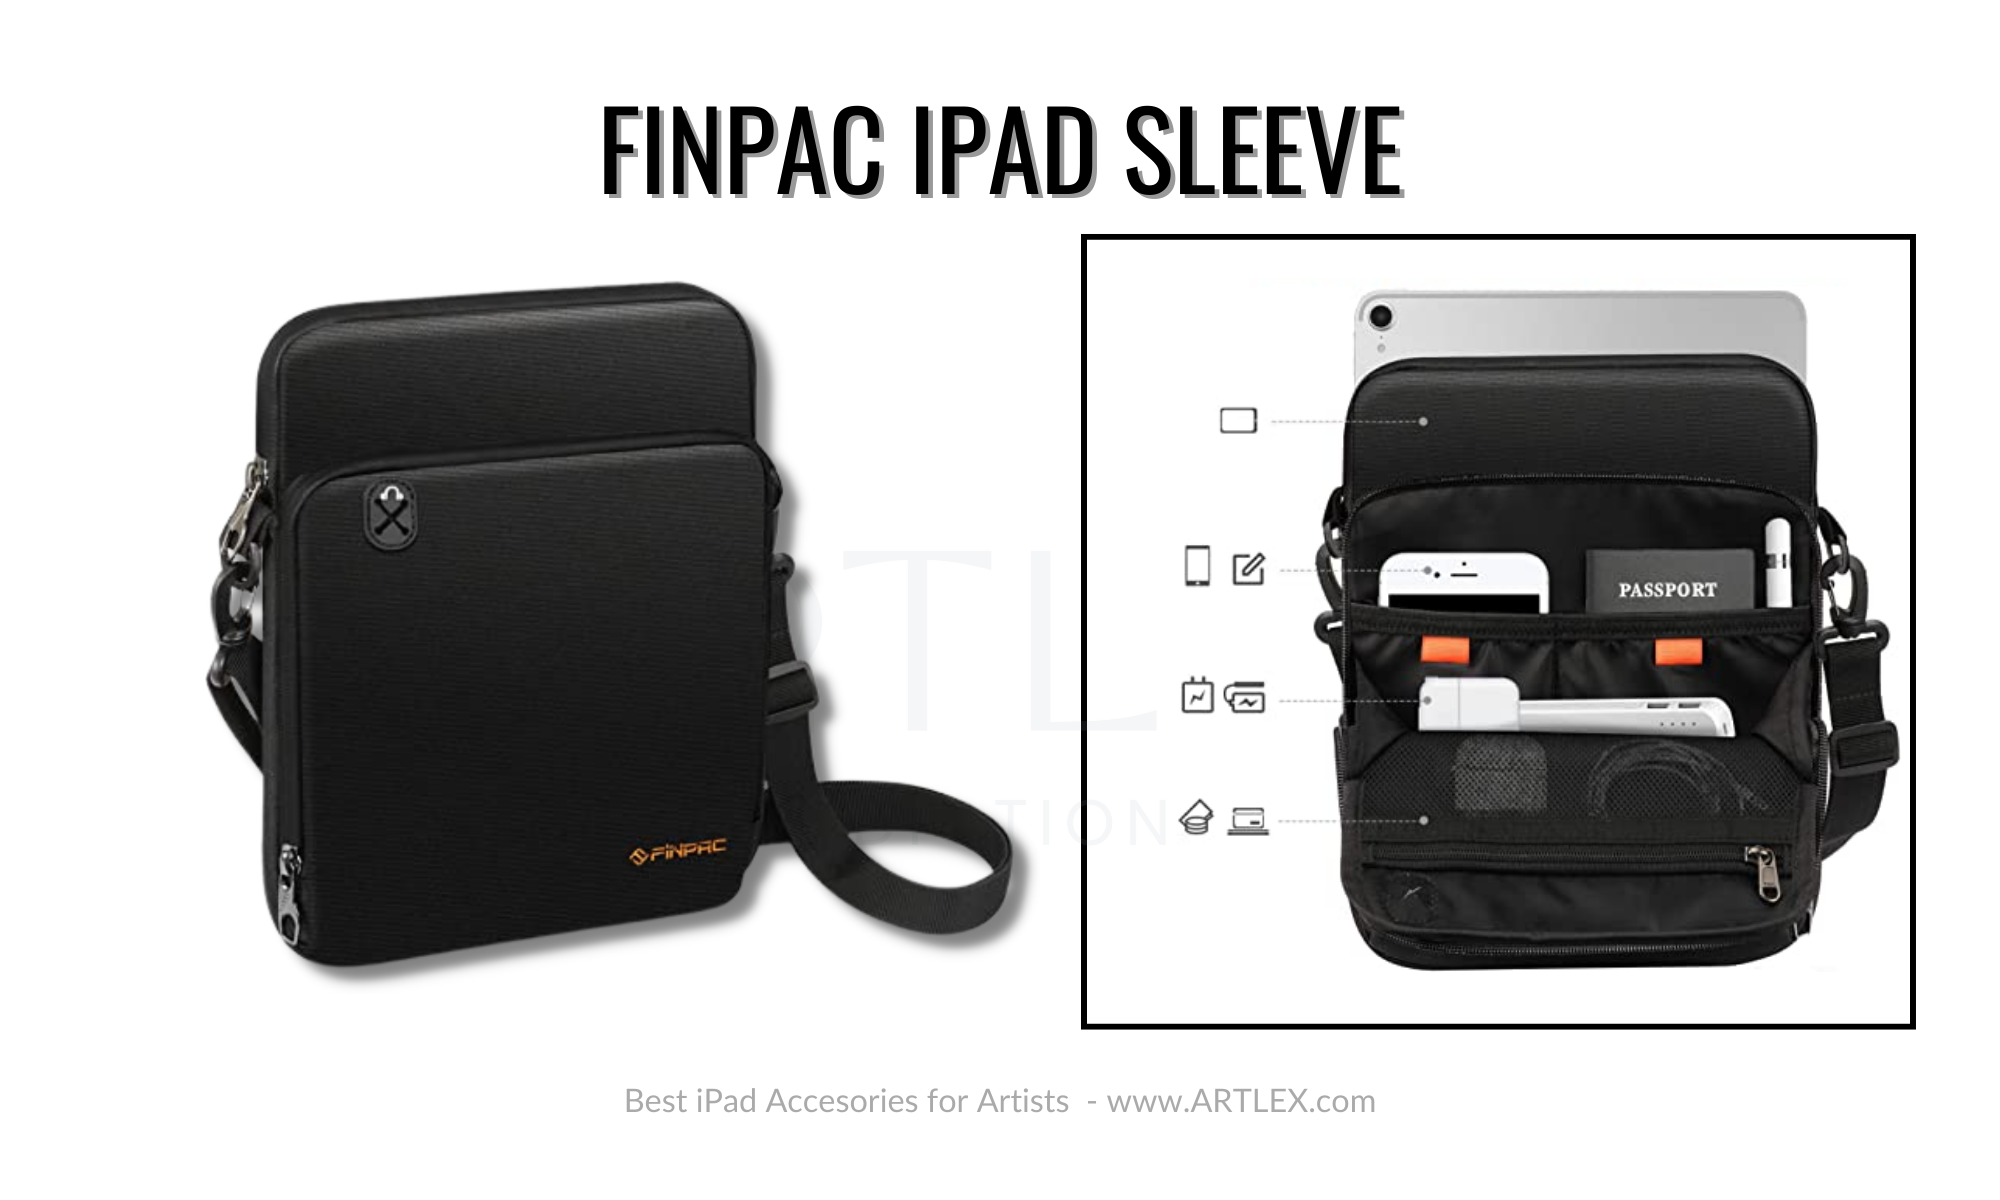 Second Best Carrying Bag — FINPAC Tablet Sleeve